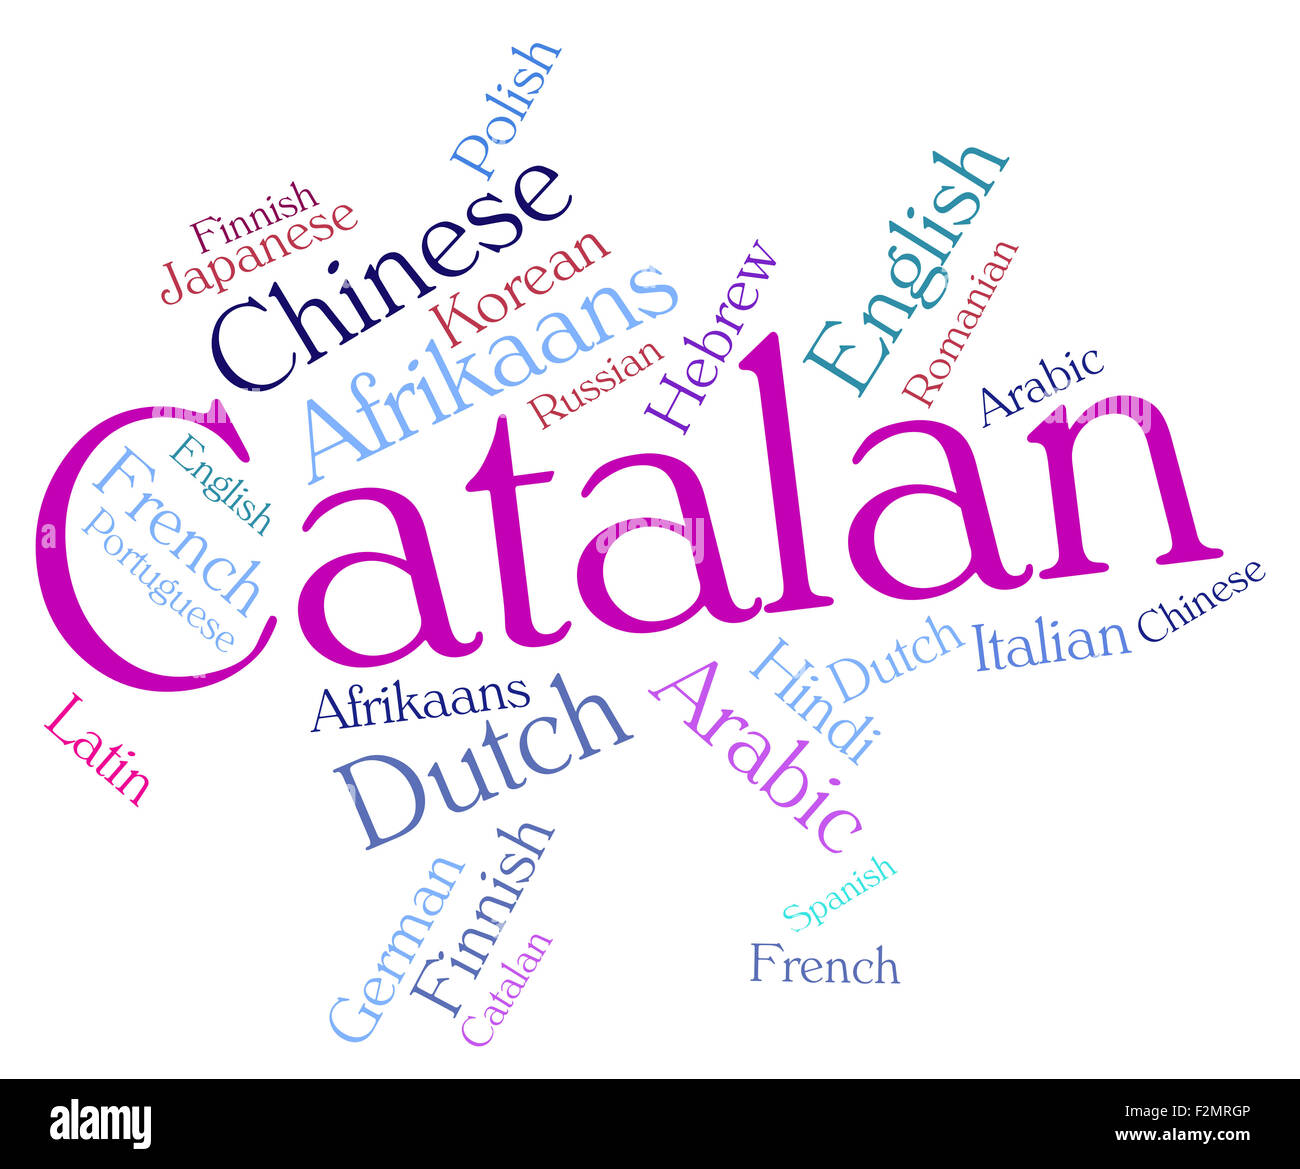 Catalan Language Showing Languages Catalonia And Text Stock Photo